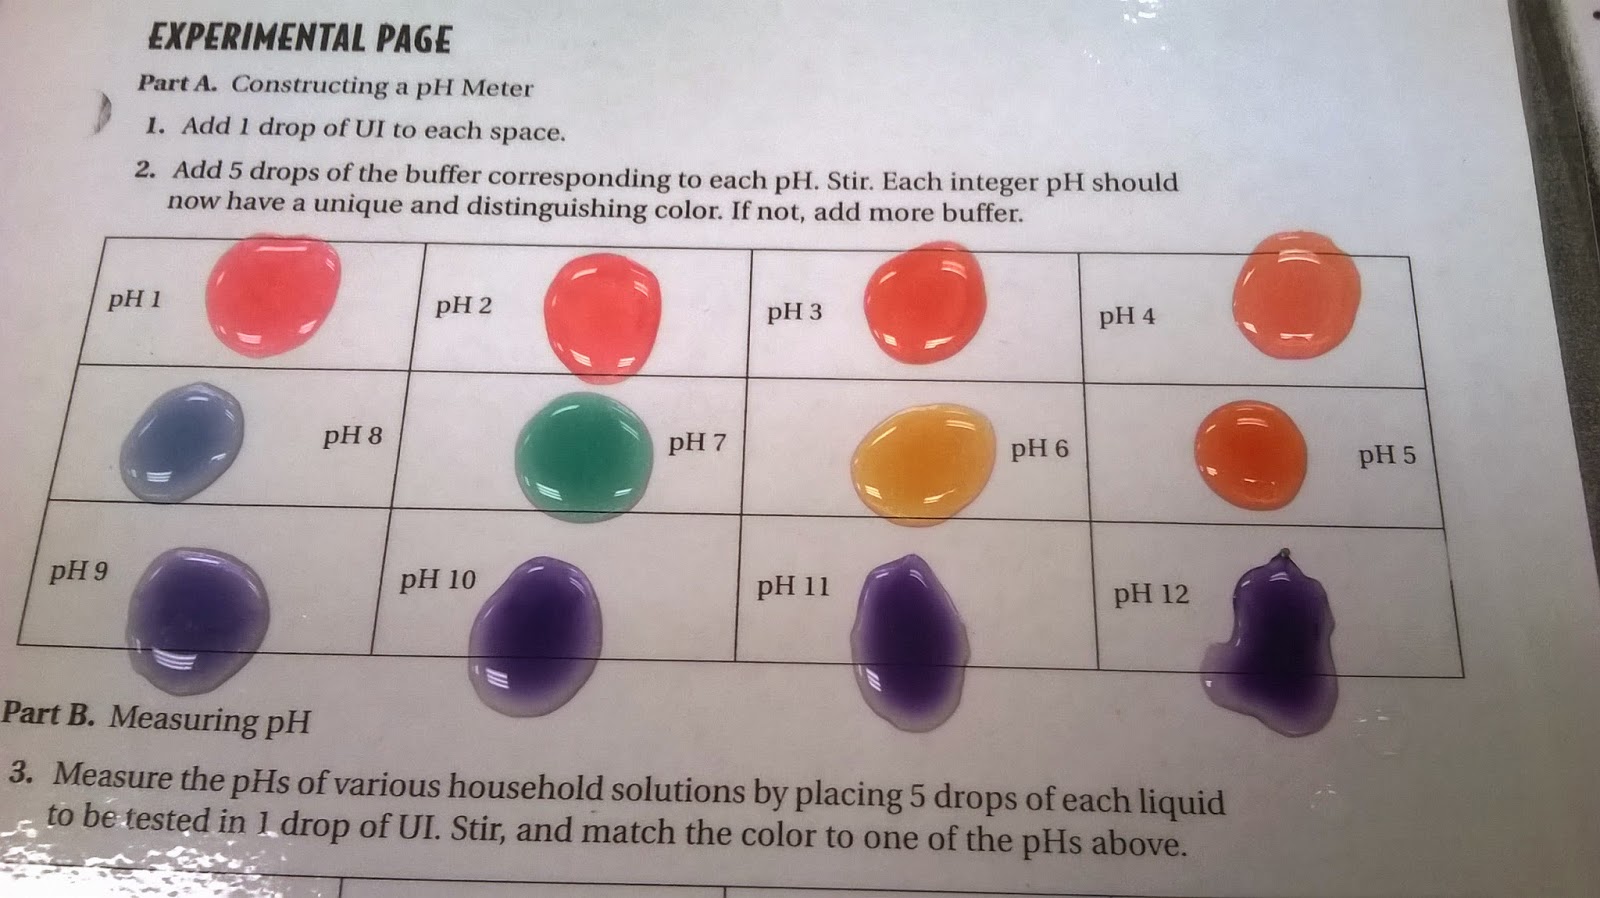 Testing the Ph of Common Household Substances Lab Essay